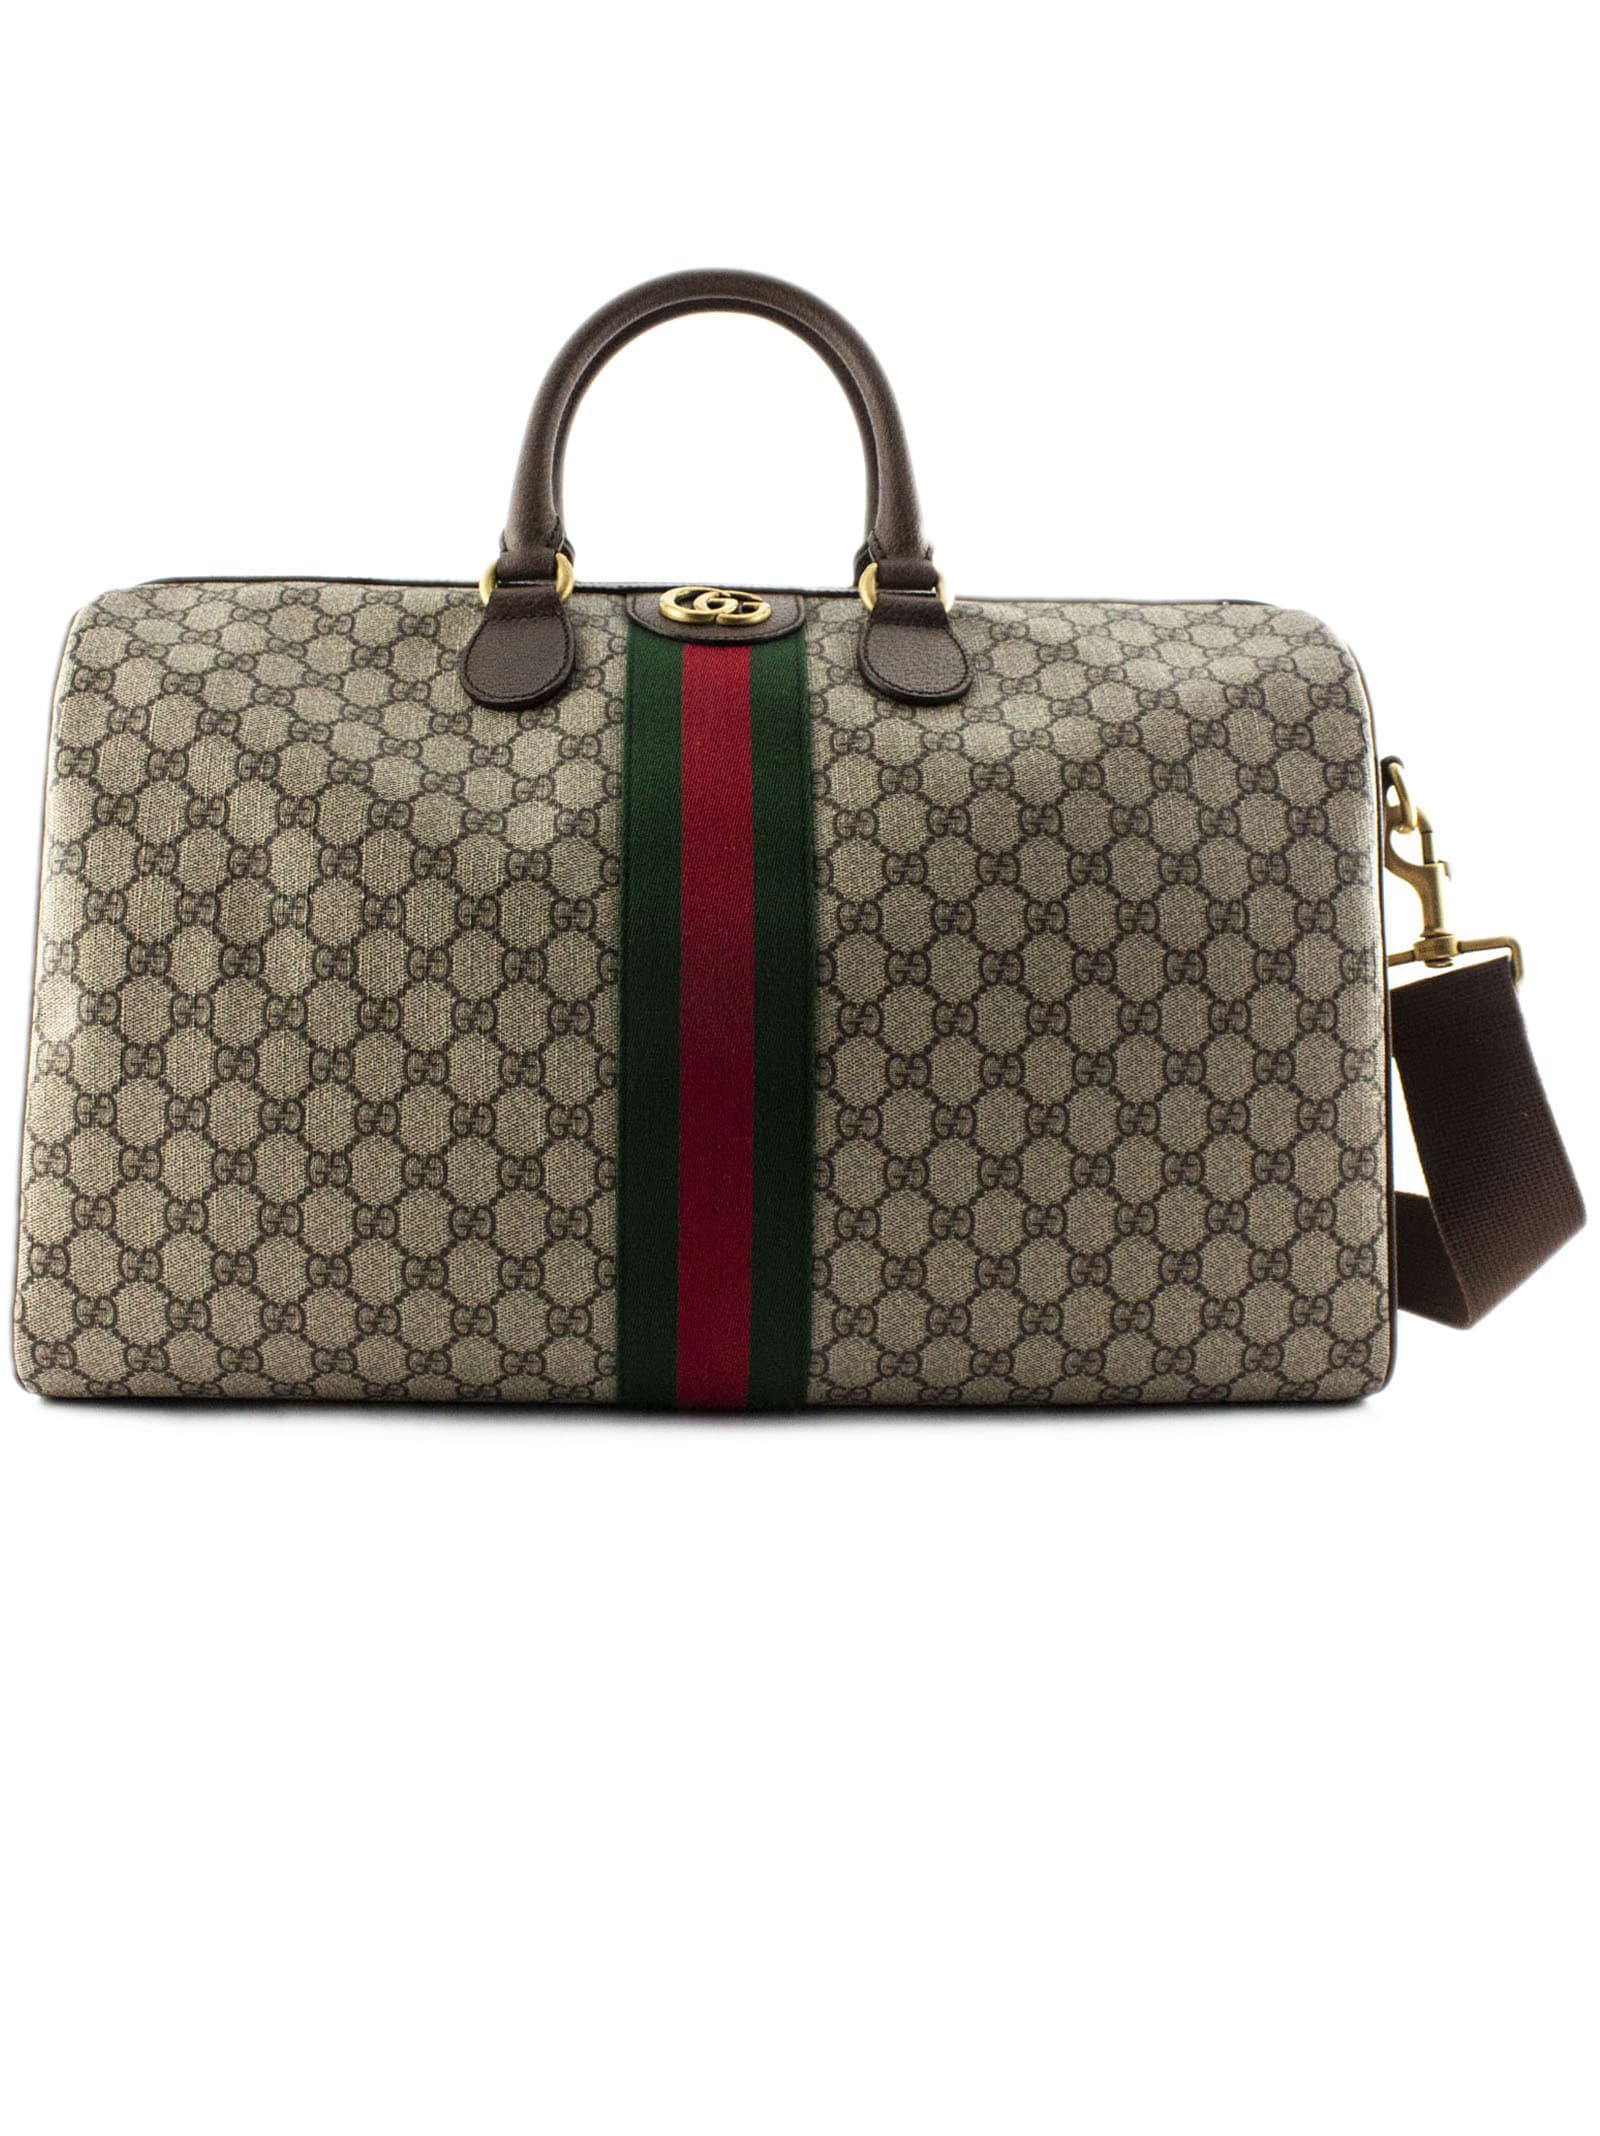 Gucci Ophidia Medium Carry-on Duffle Gg Supreme In Beige